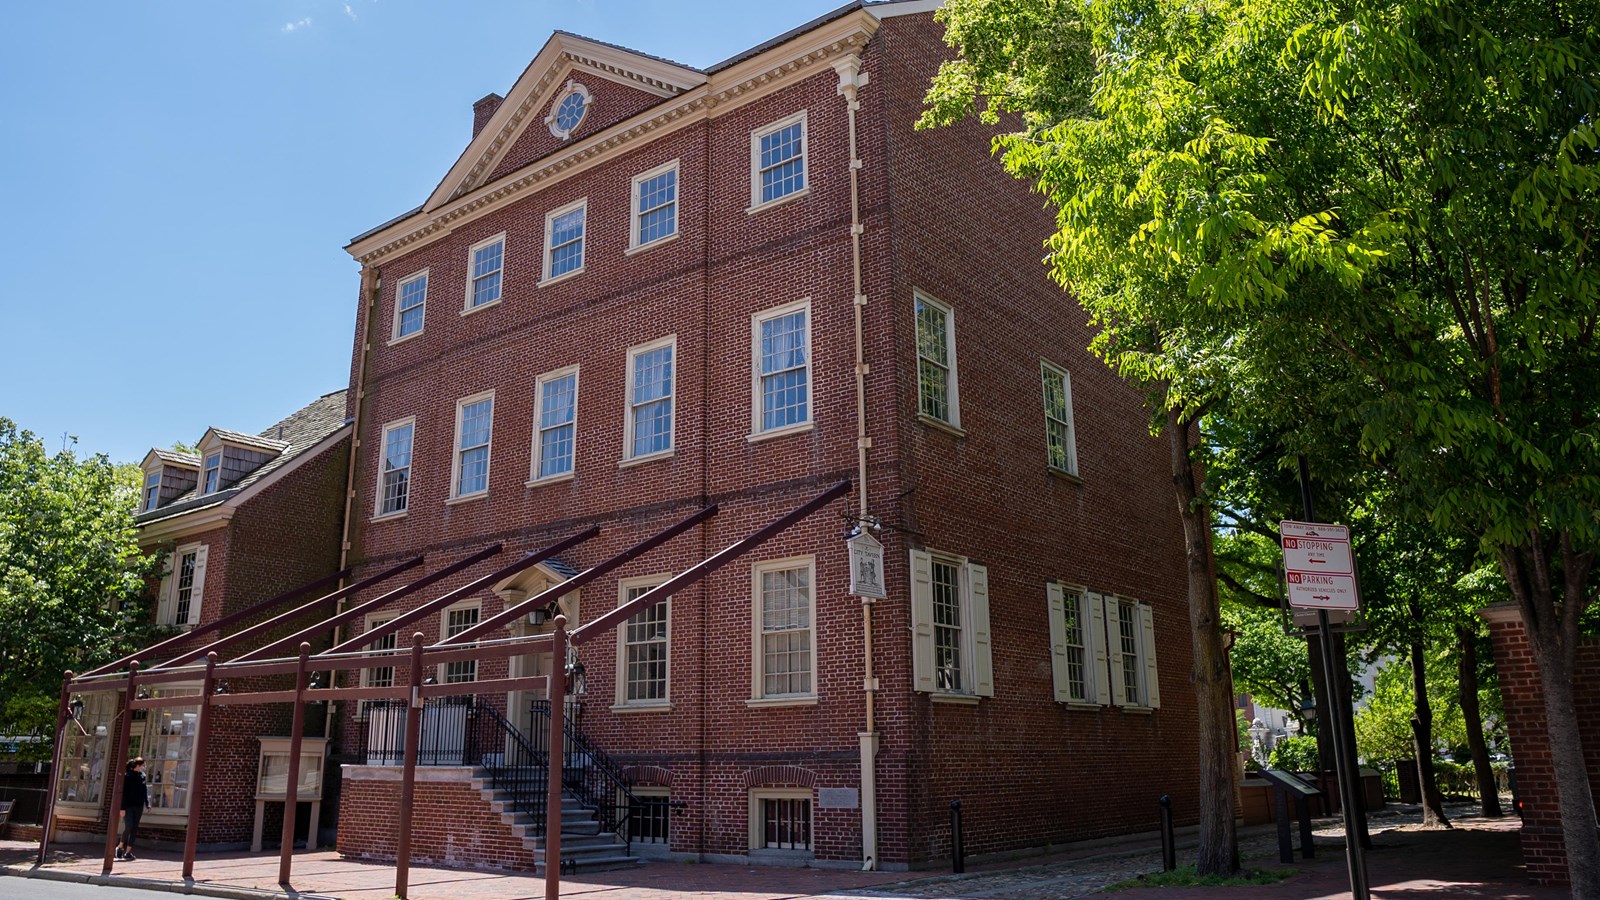 Exterior view of three story red brick building with numerous windows on each level.